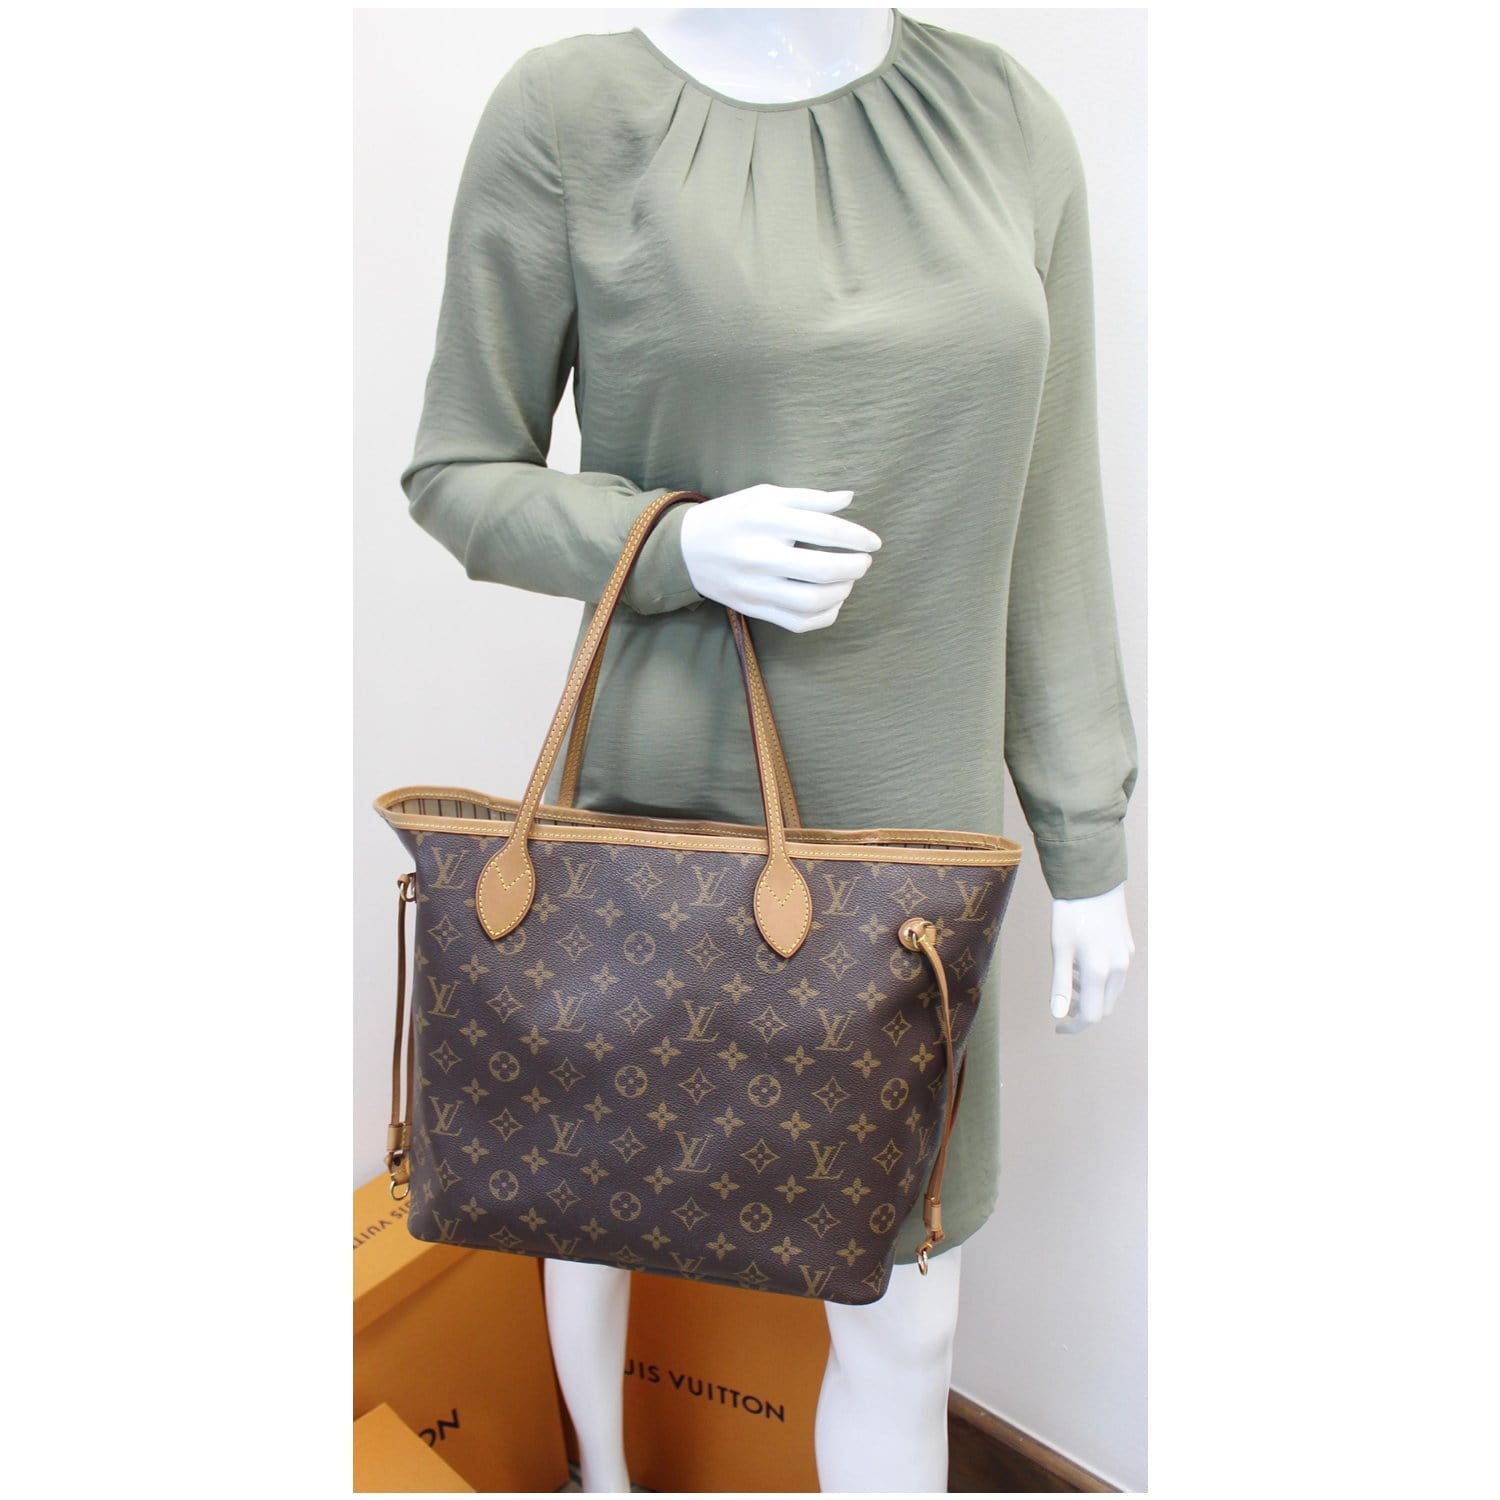 Louis Vuitton Medium Tote Bags for Women, Authenticity Guaranteed